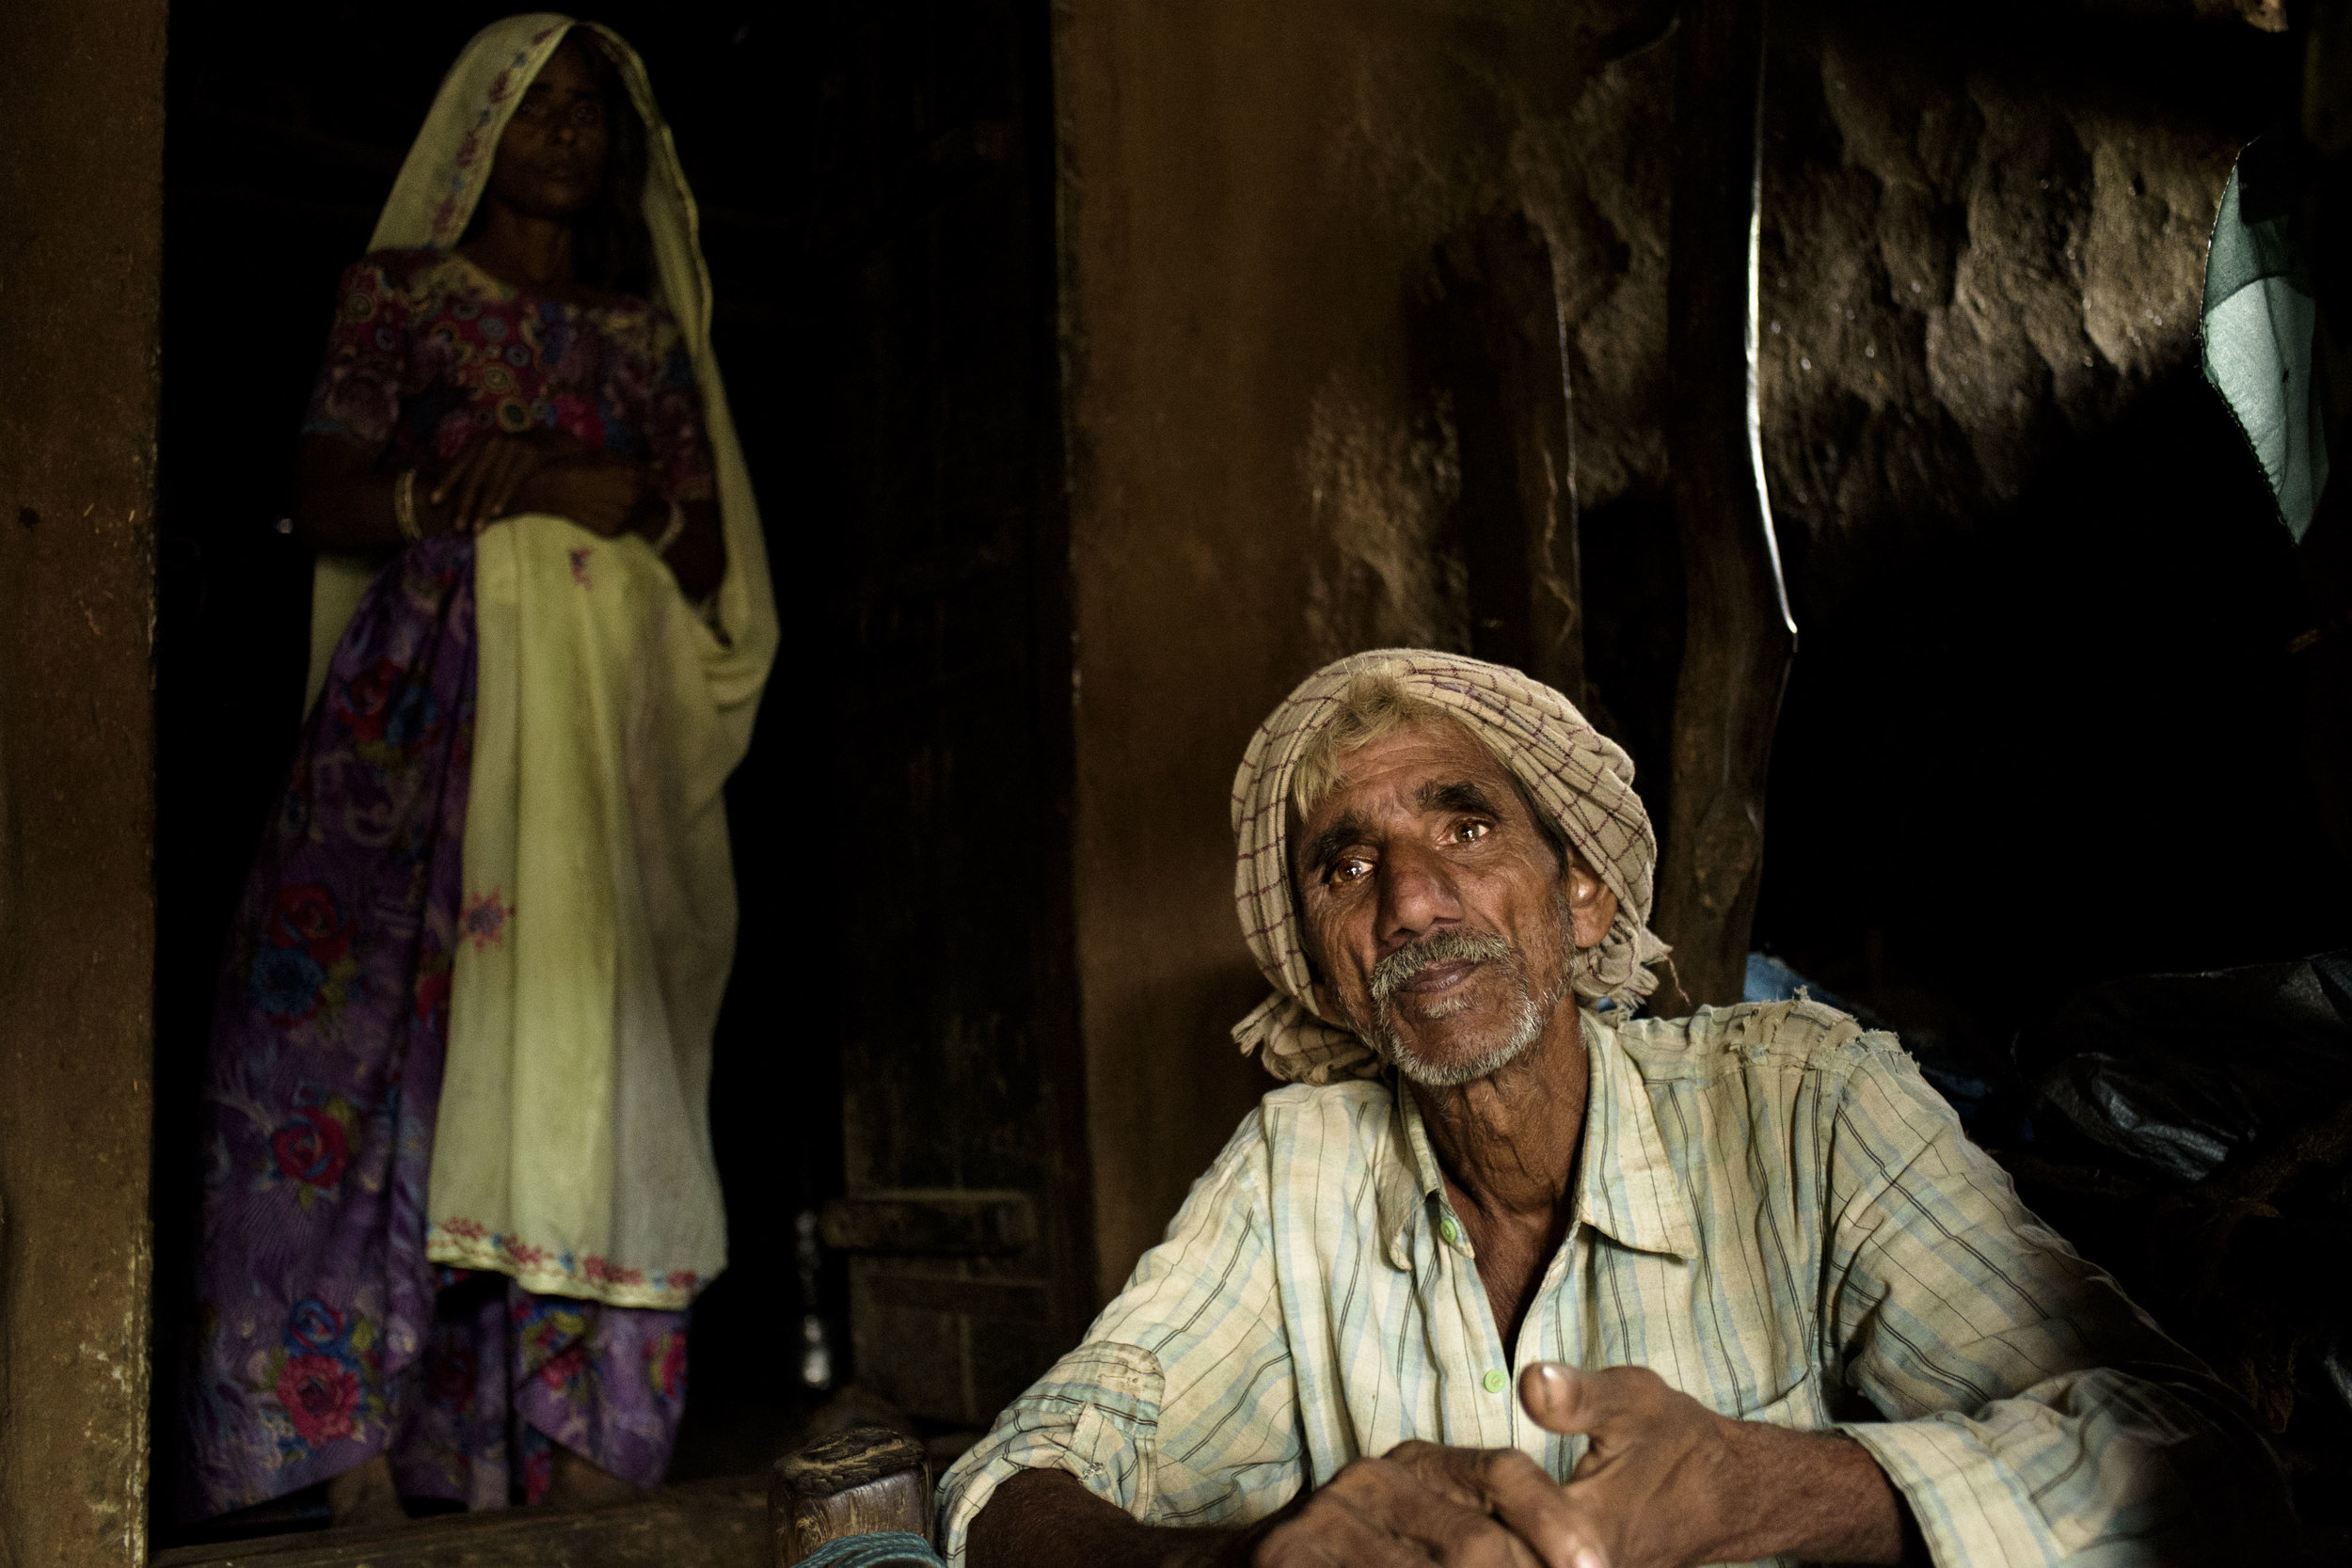  Bhura sits in the courtyard of his house while he explains how the Mukhyamantri Nishulk Dawa Yojna has benefitted him. Bhura lives below the poverty line. With very little income to support a family, he feels relieved that the diagnosis and medicine